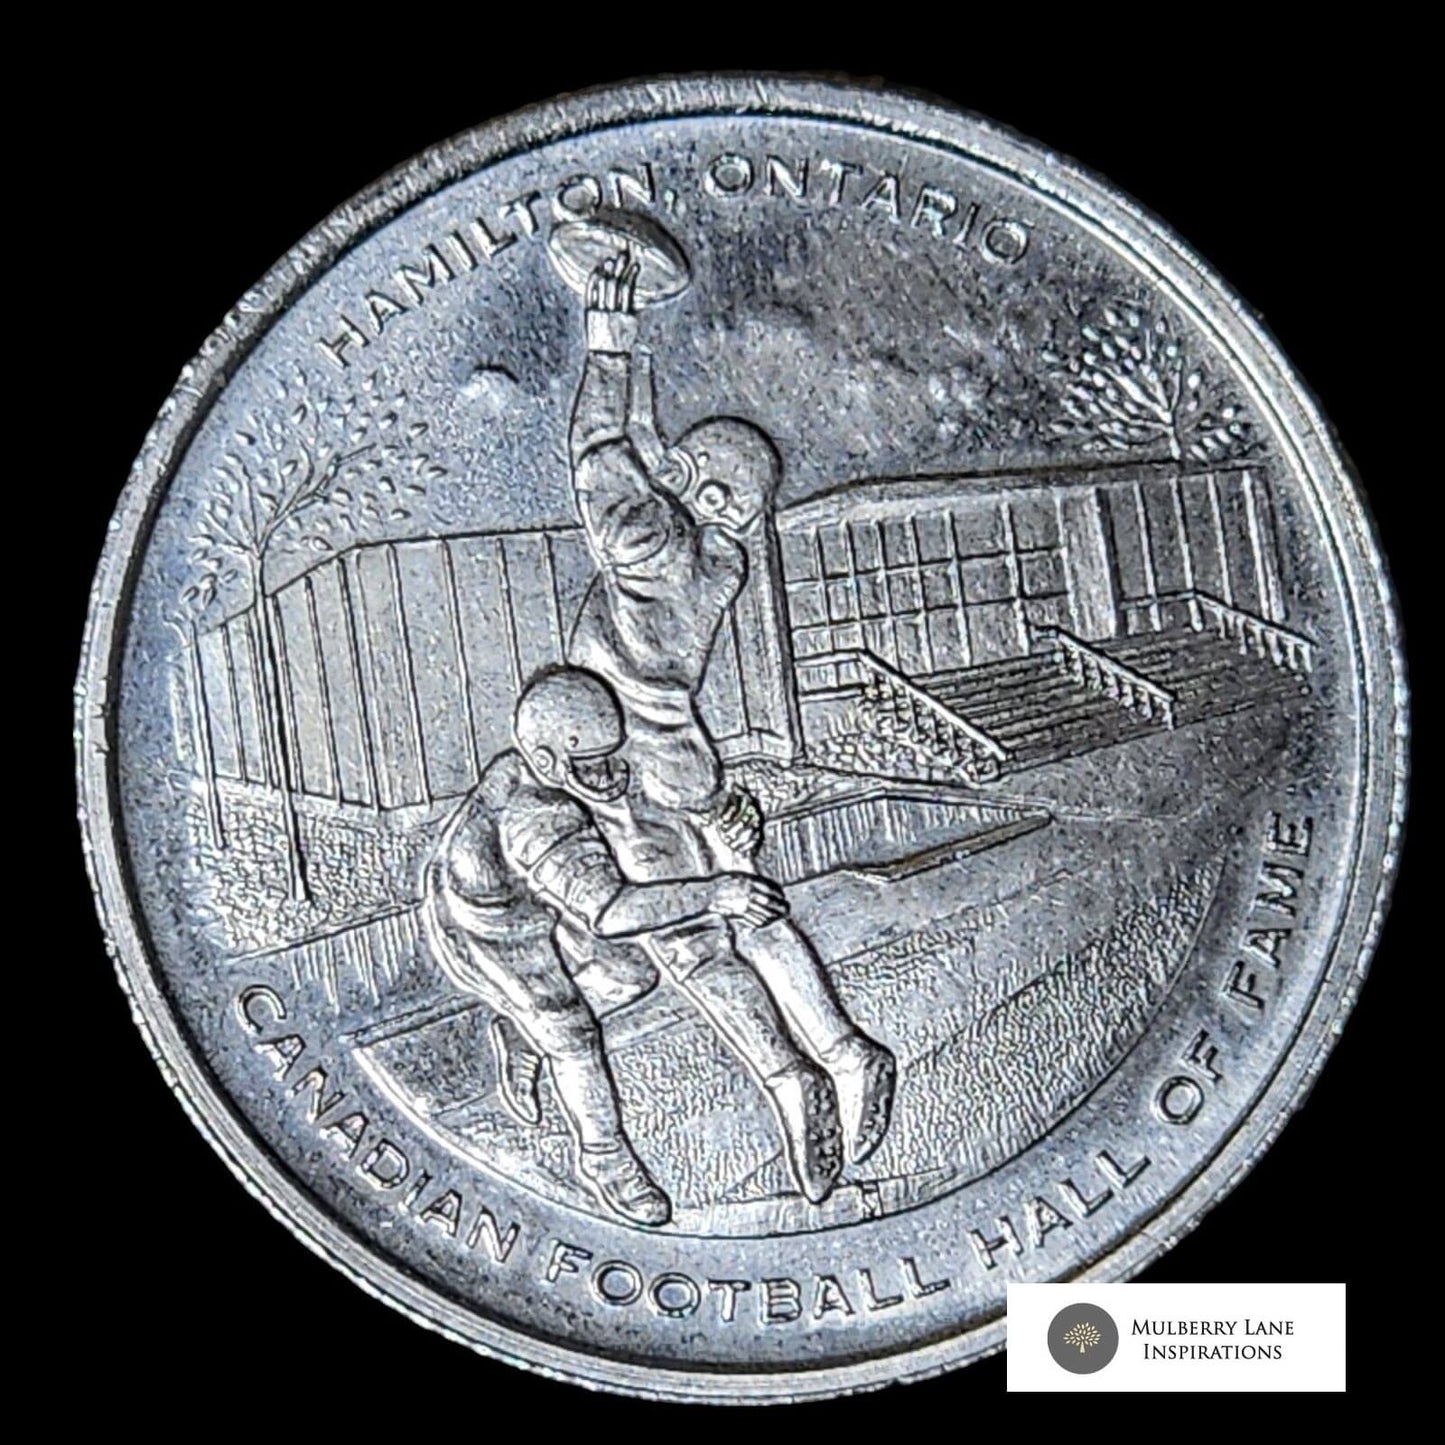 A coin with a grey cup symbol.